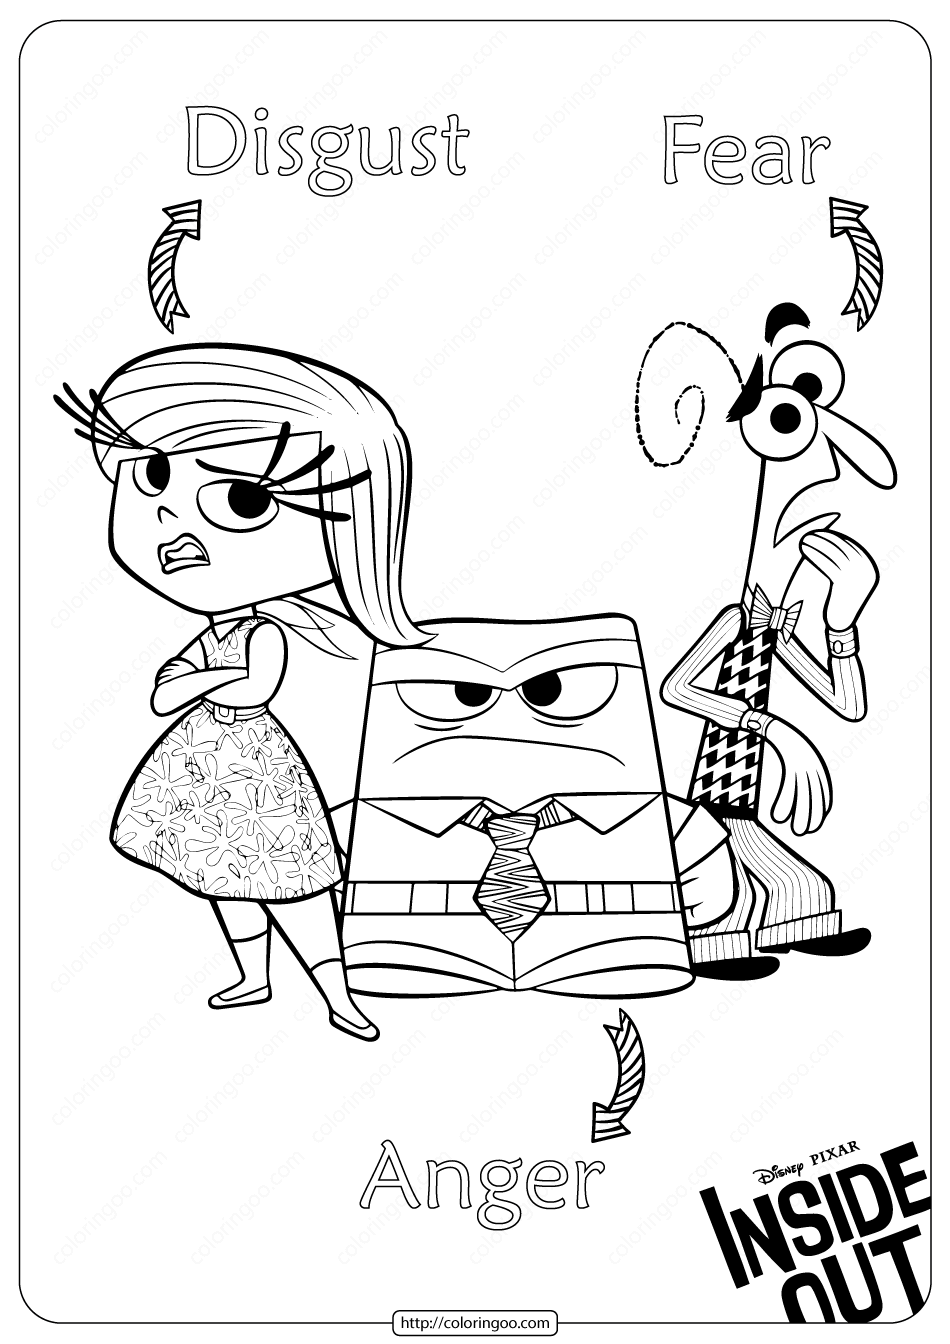 printable inside out disgust fear and anger coloring page